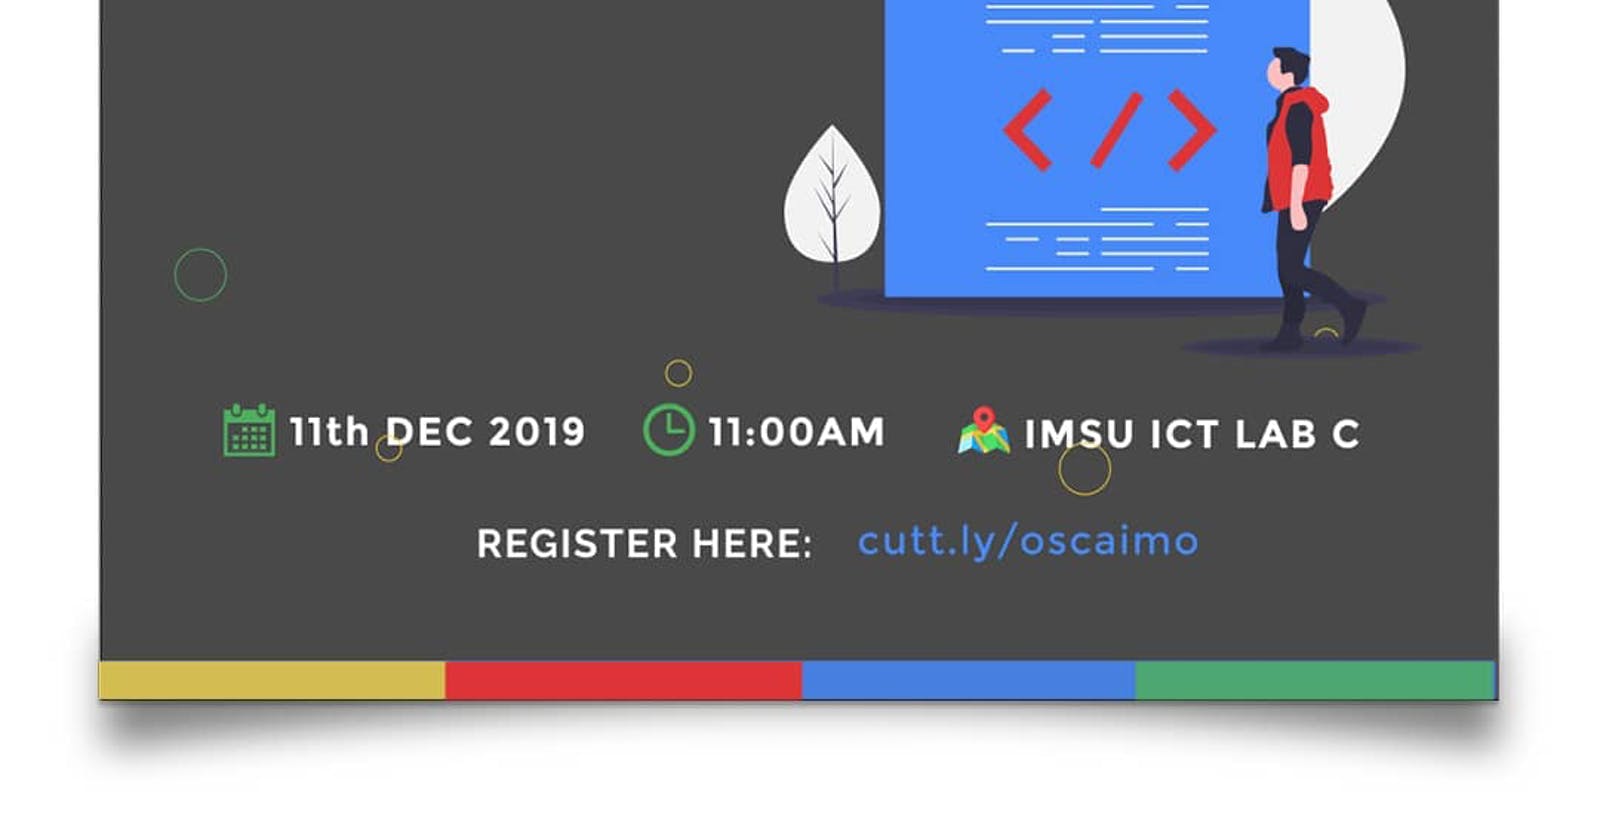 OSCAIMO: Let's Do This The Open Source Way